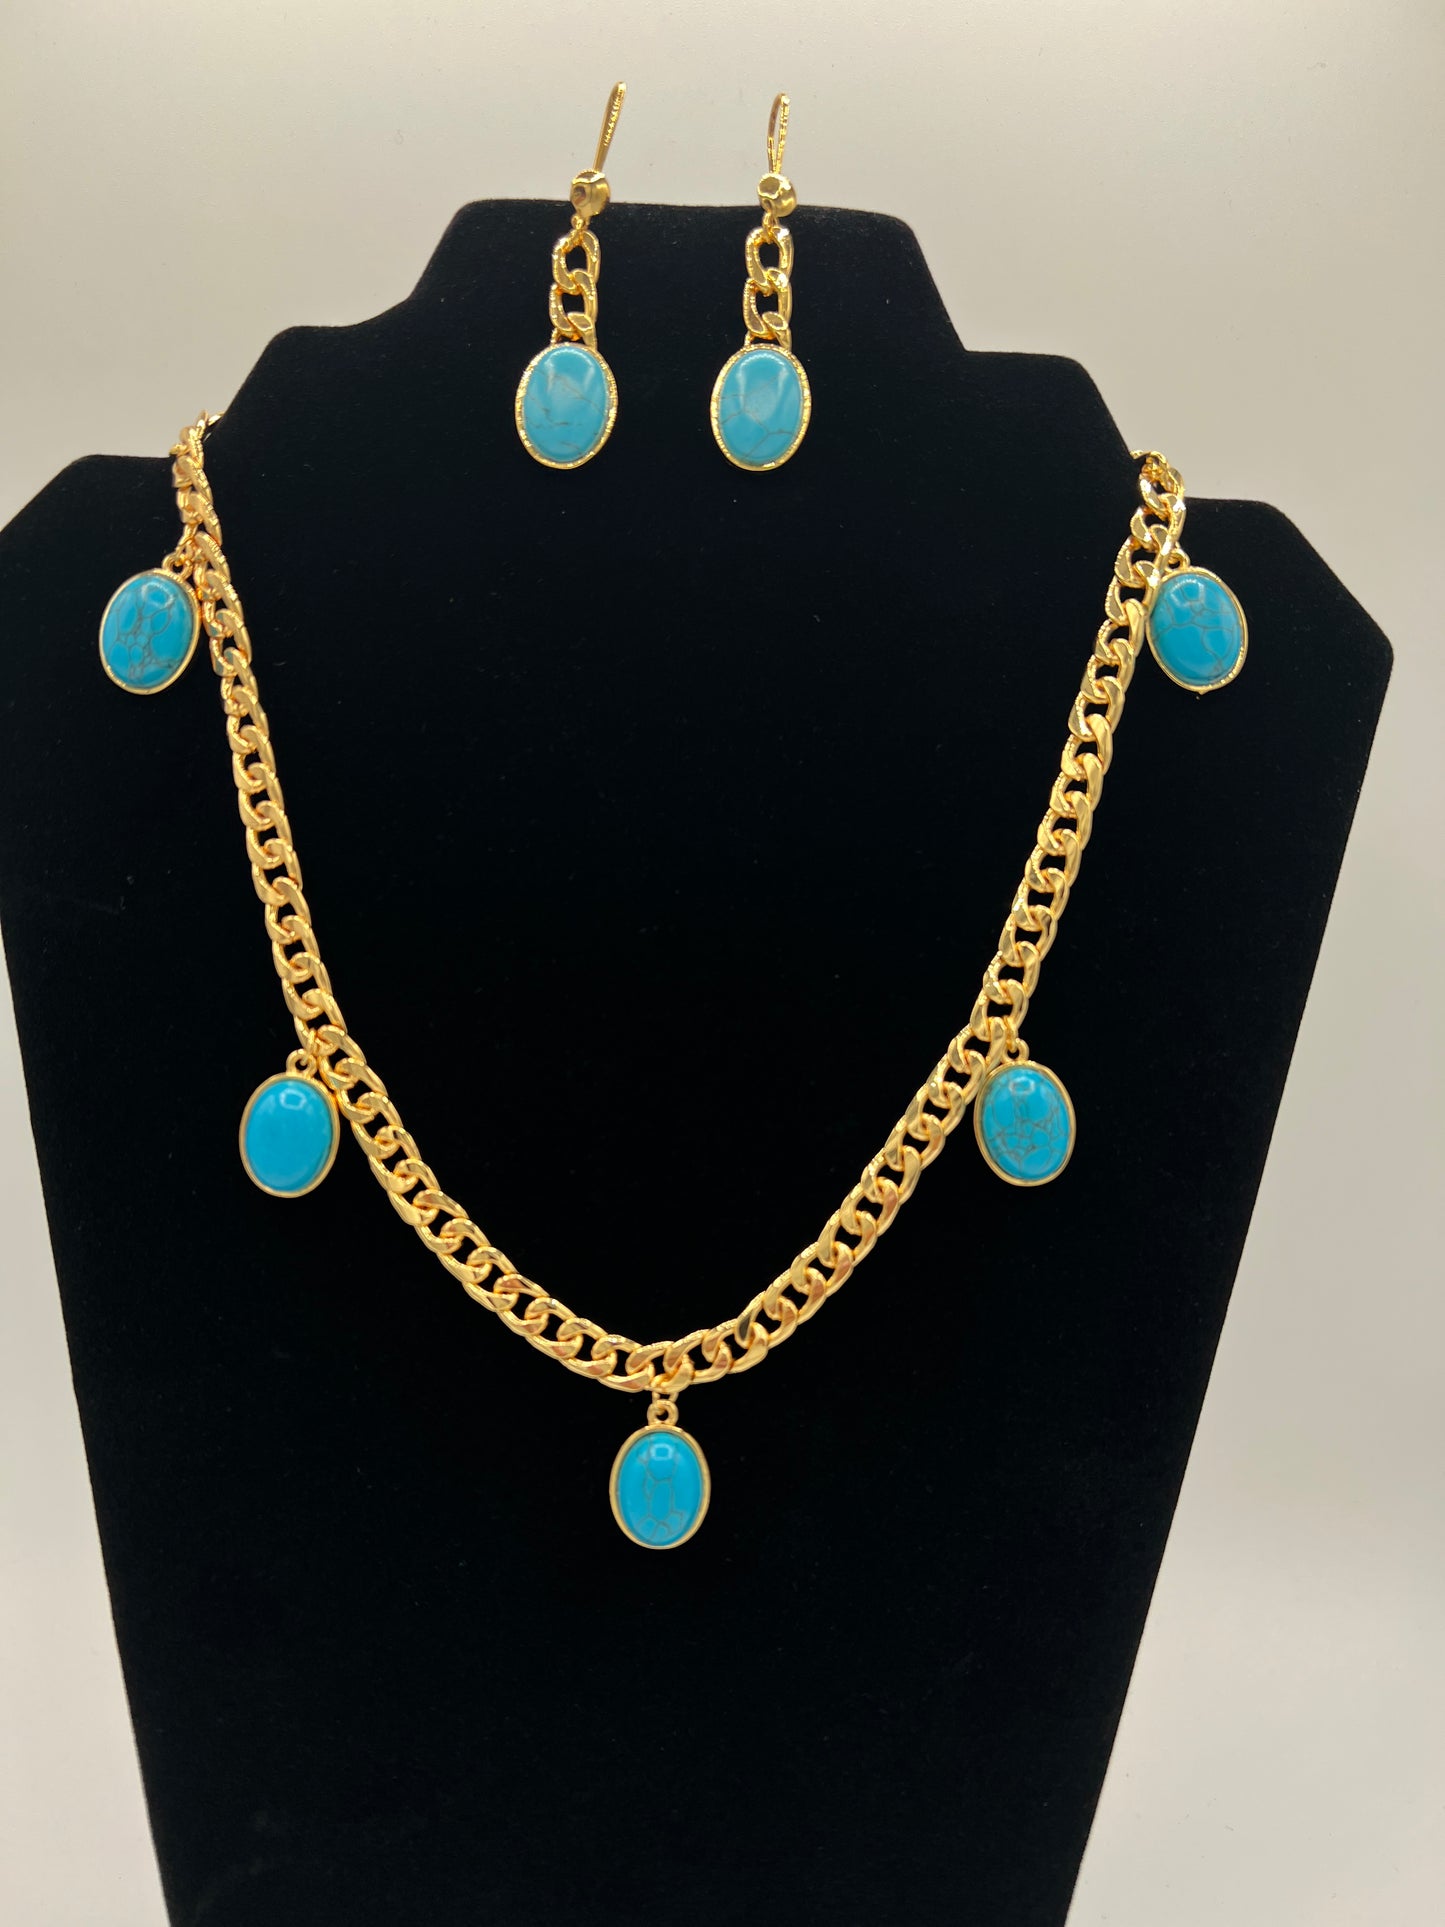 Oval Turquoise And Gold Earrings And Turquoise Charms Necklace Sets